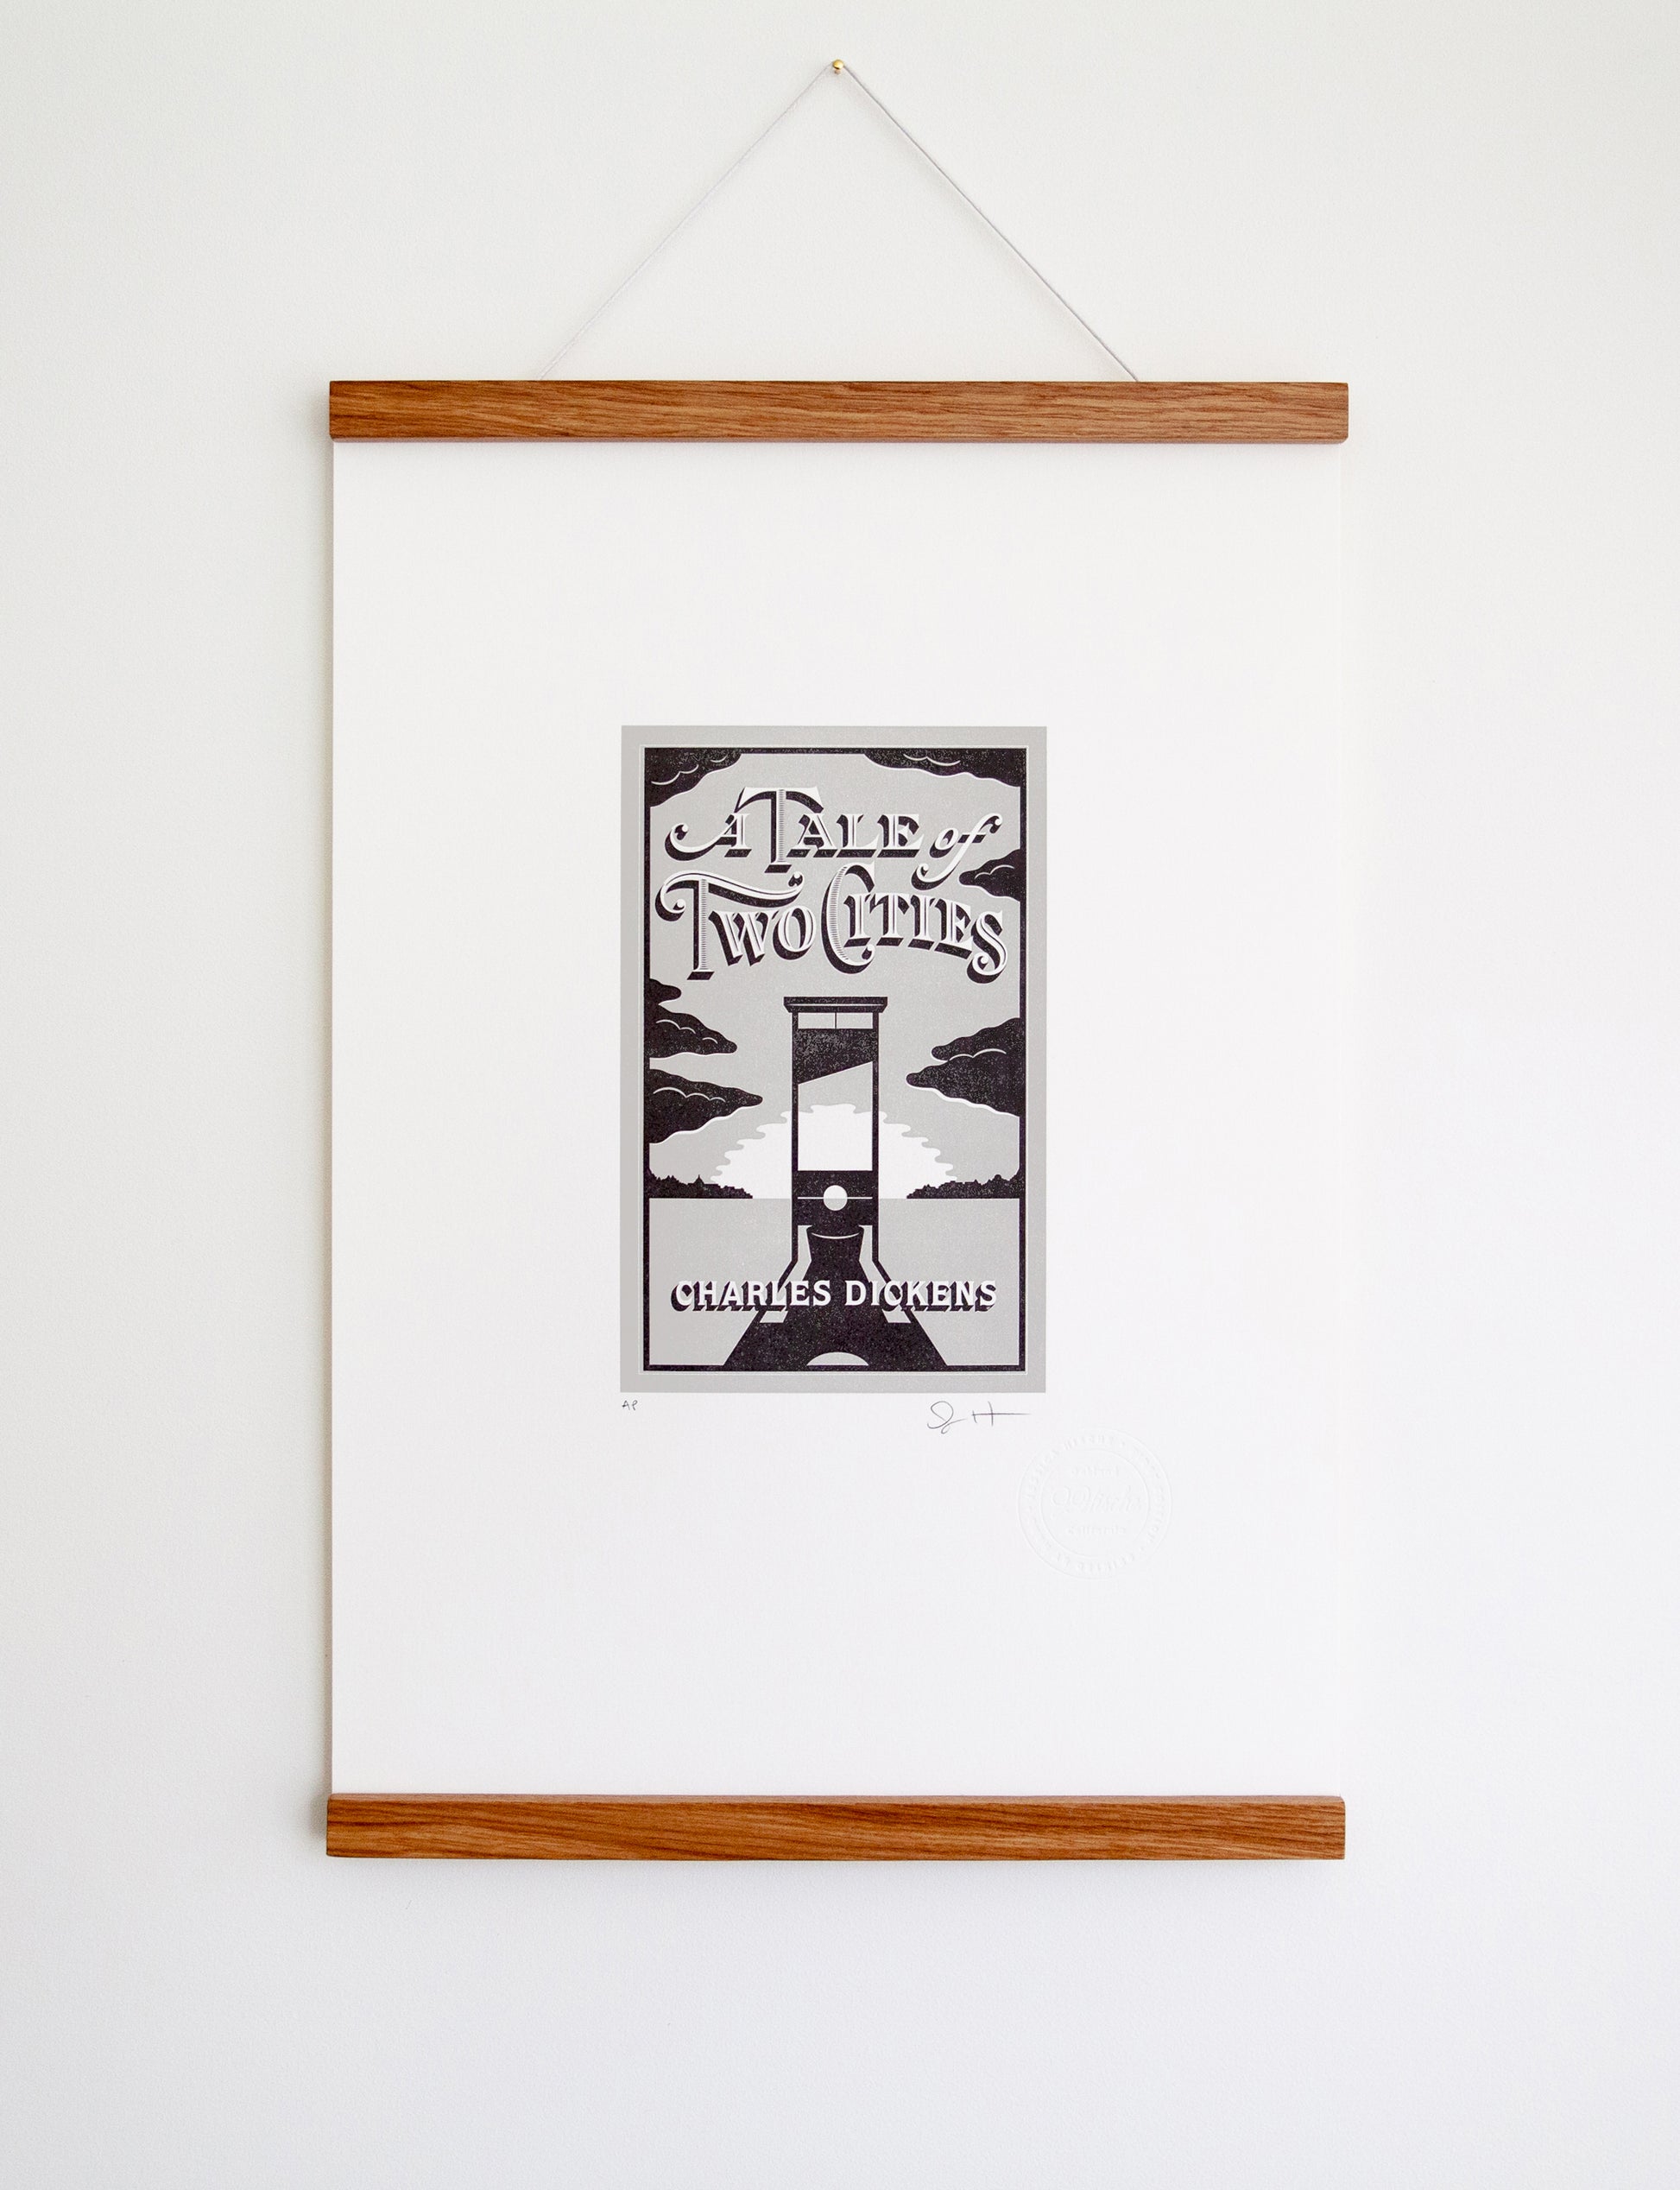 Framed 2-color letterpress print in gray and black. Printed artwork is an illustrated book cover of A Tale of Two Cities including custom hand lettering.